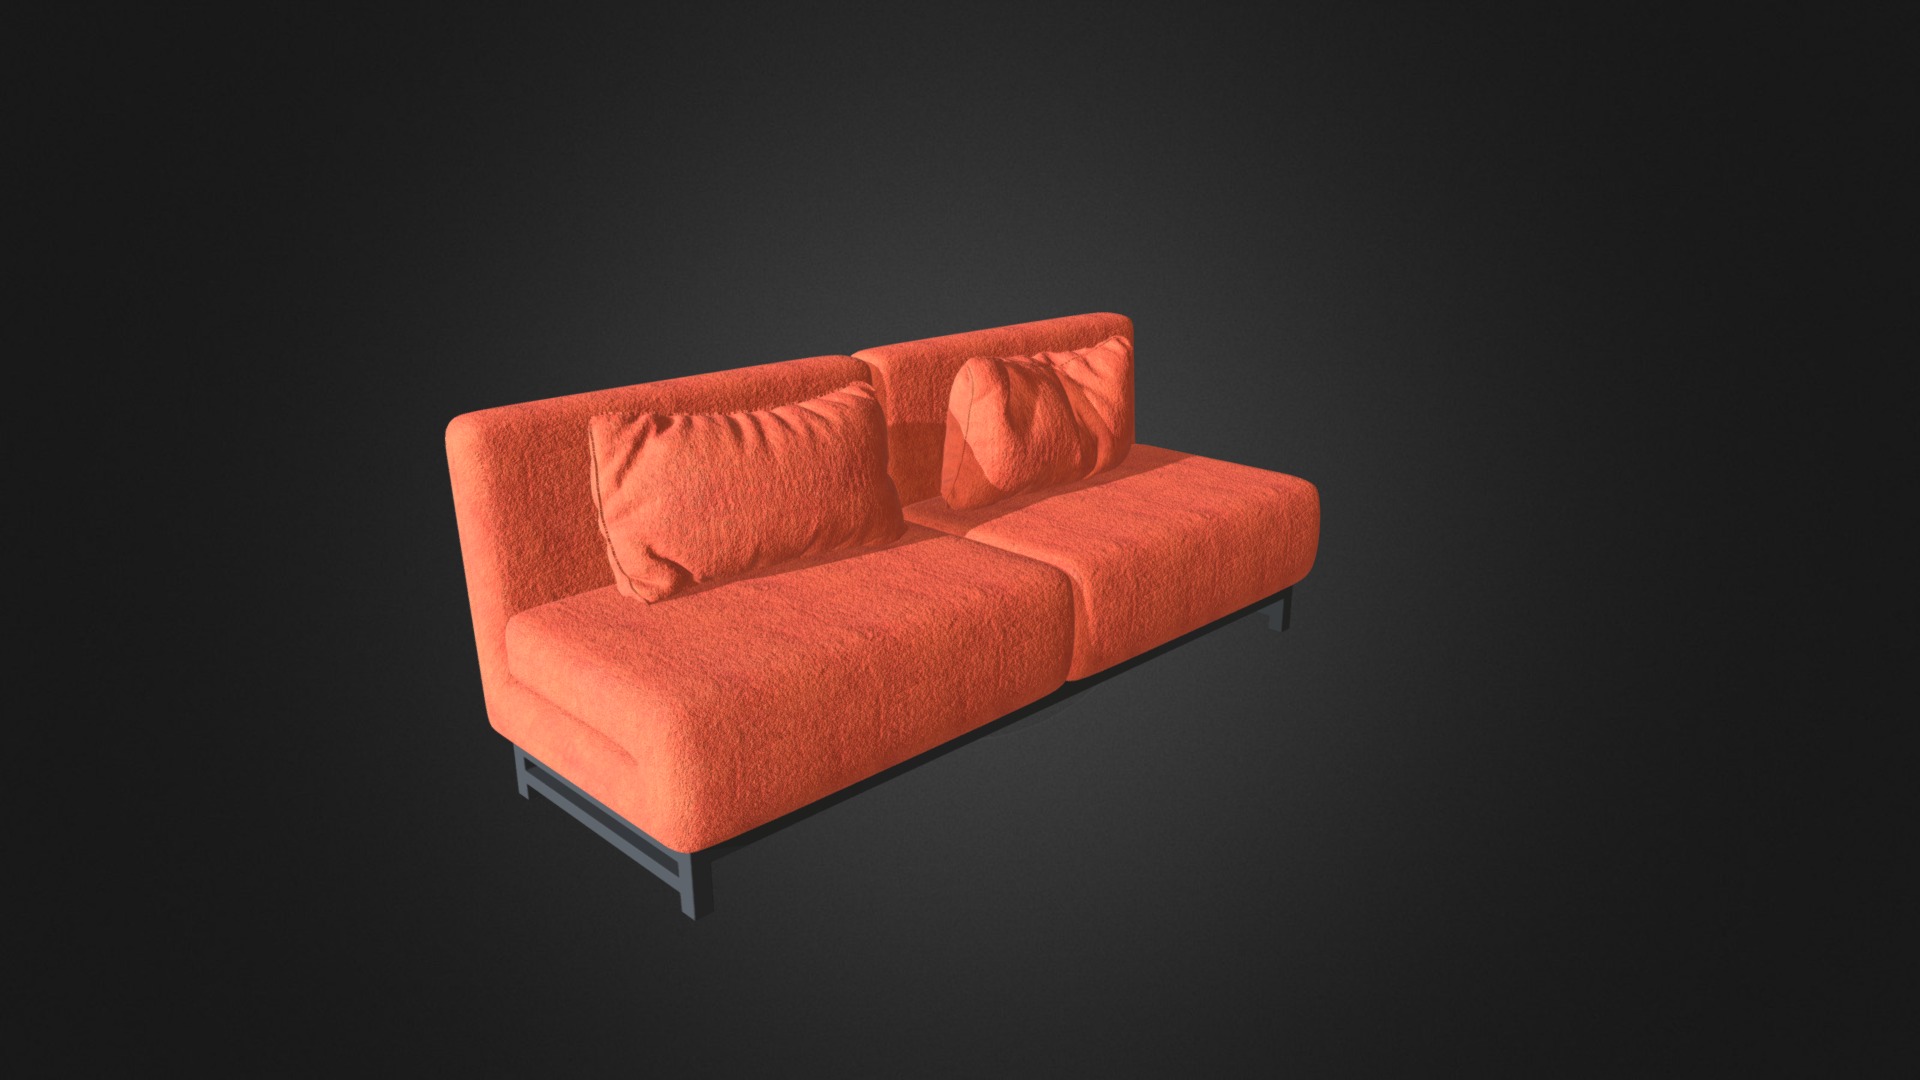 3D model Orange Fabric Sofa - This is a 3D model of the Orange Fabric Sofa. The 3D model is about a red couch with a black background.